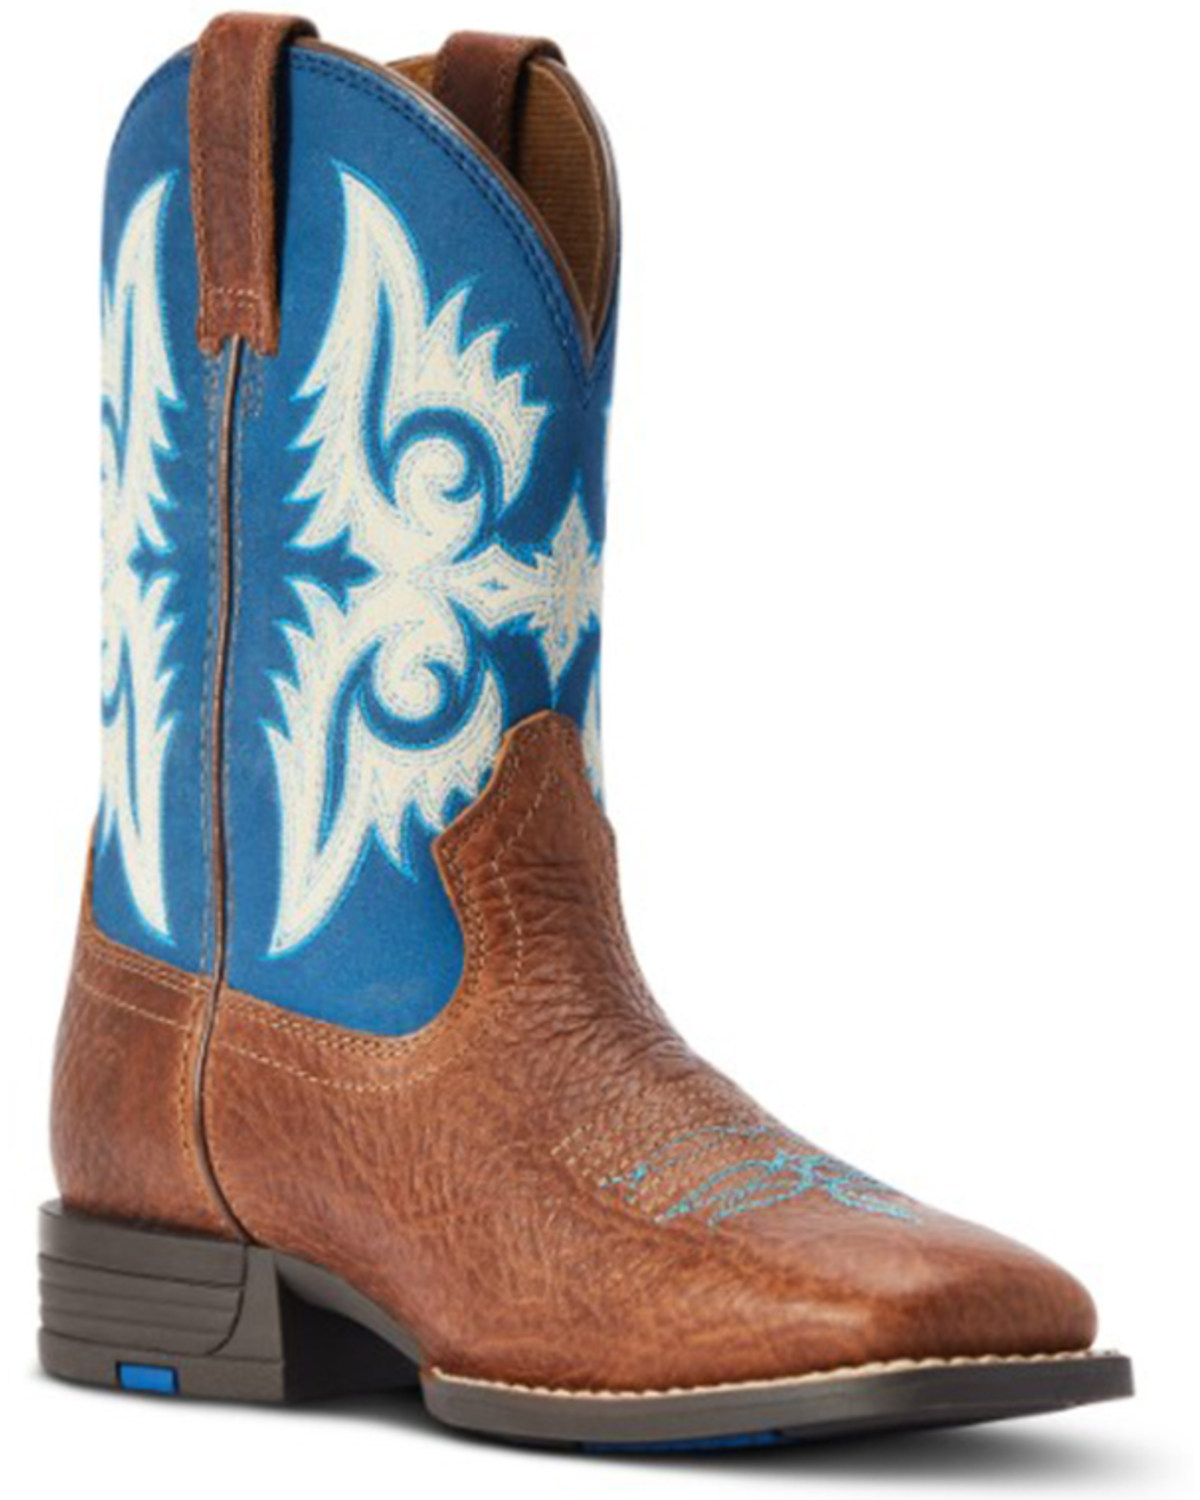 Ariat Boys' Lonestar Red Dirt Road Western Boots - Square Toe